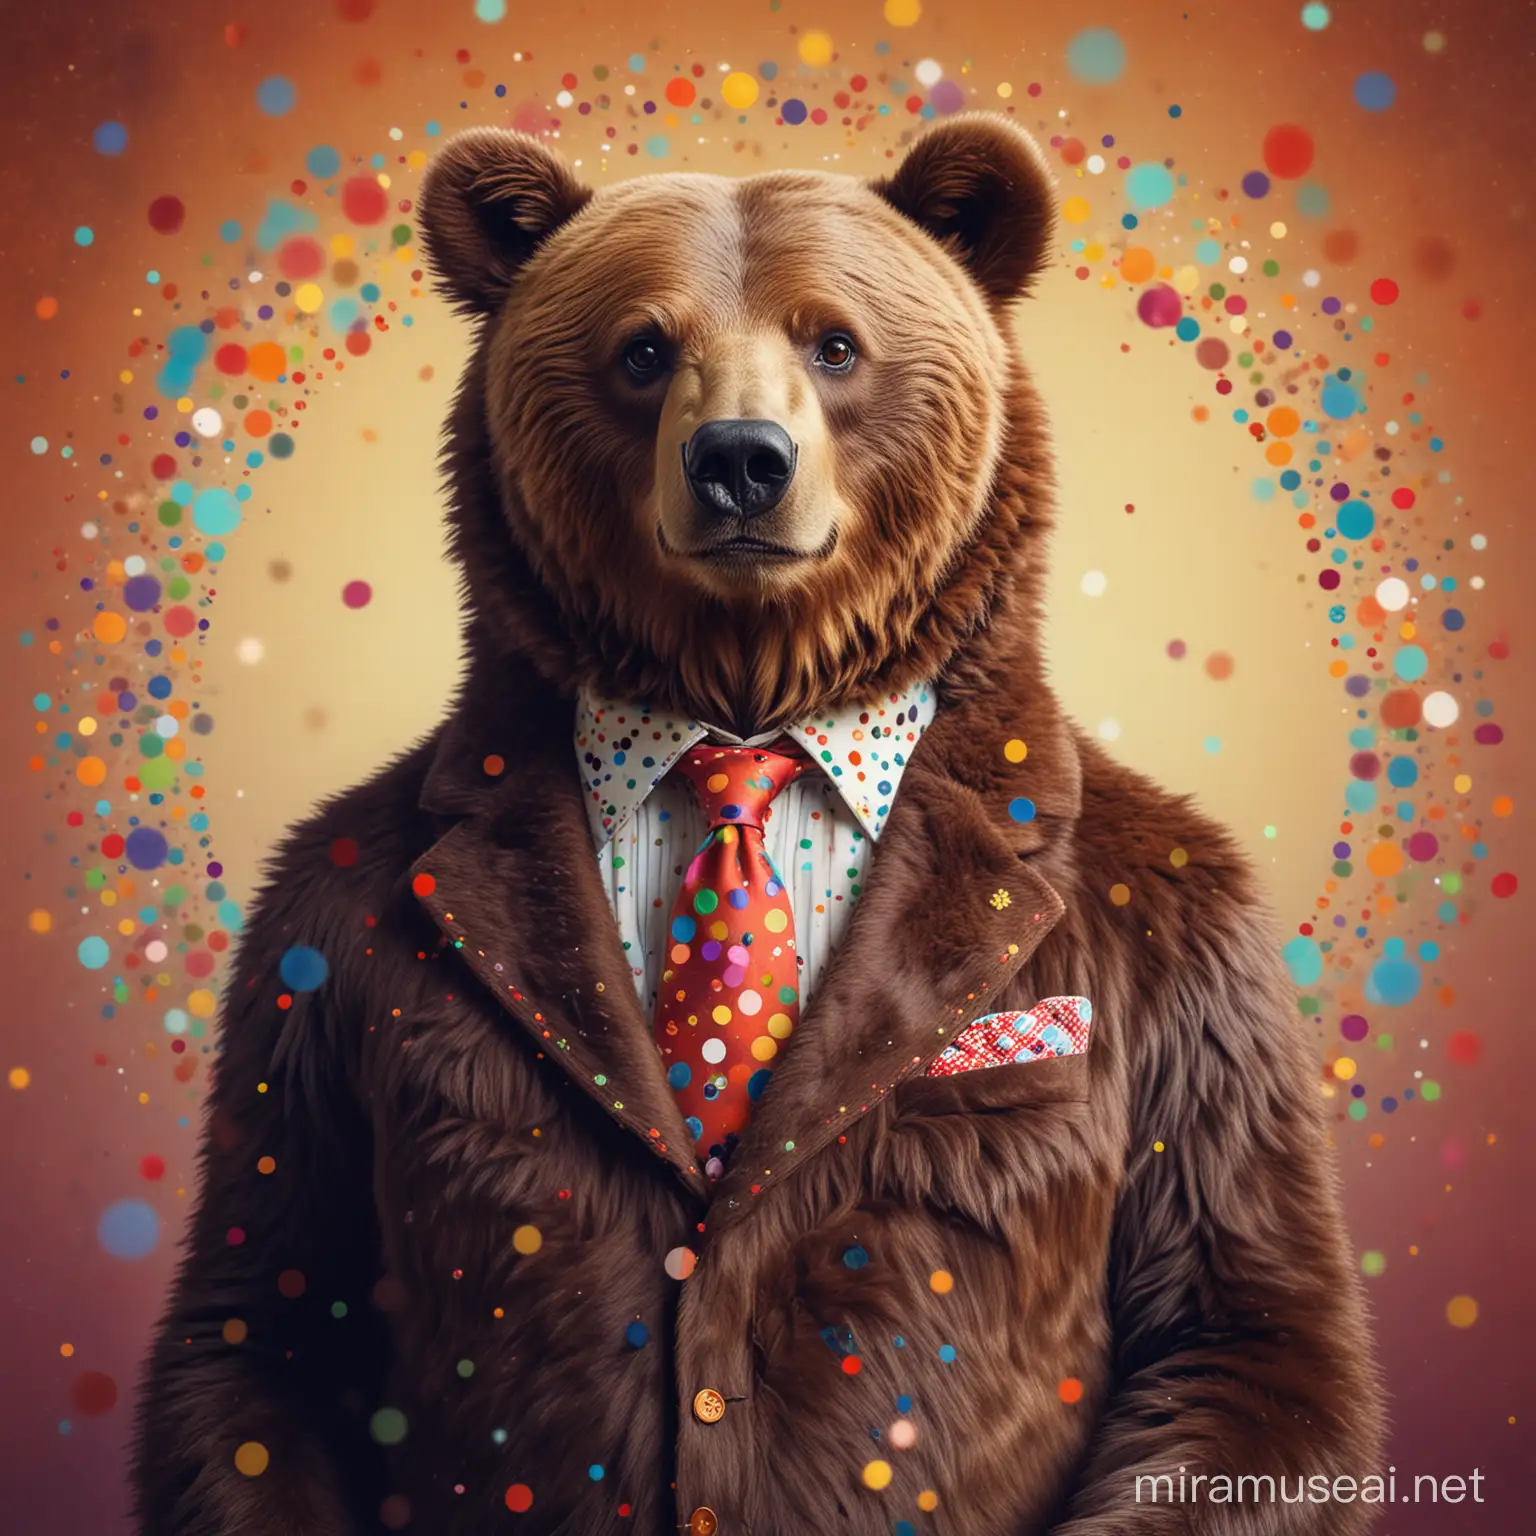 the bear with colorful dots, realistic, f12 aperature photo, dressed formally, colorful ornate background, in the quirky graphic style of Wes Anderson, text, blur